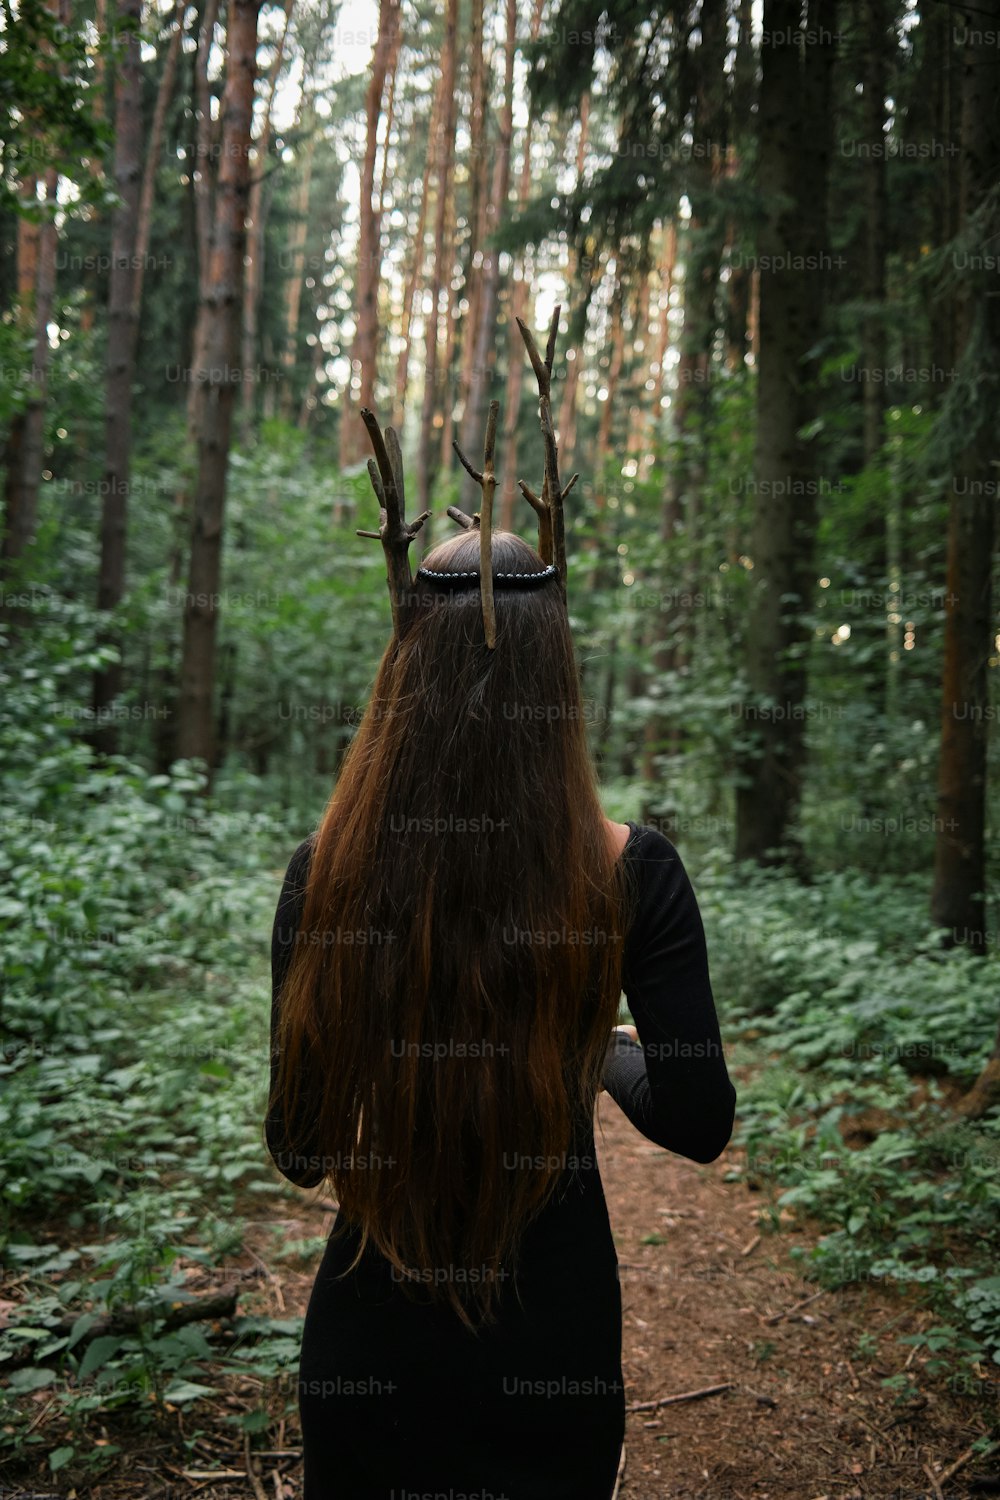 a woman with a deer's antlers on her head walking through a forest